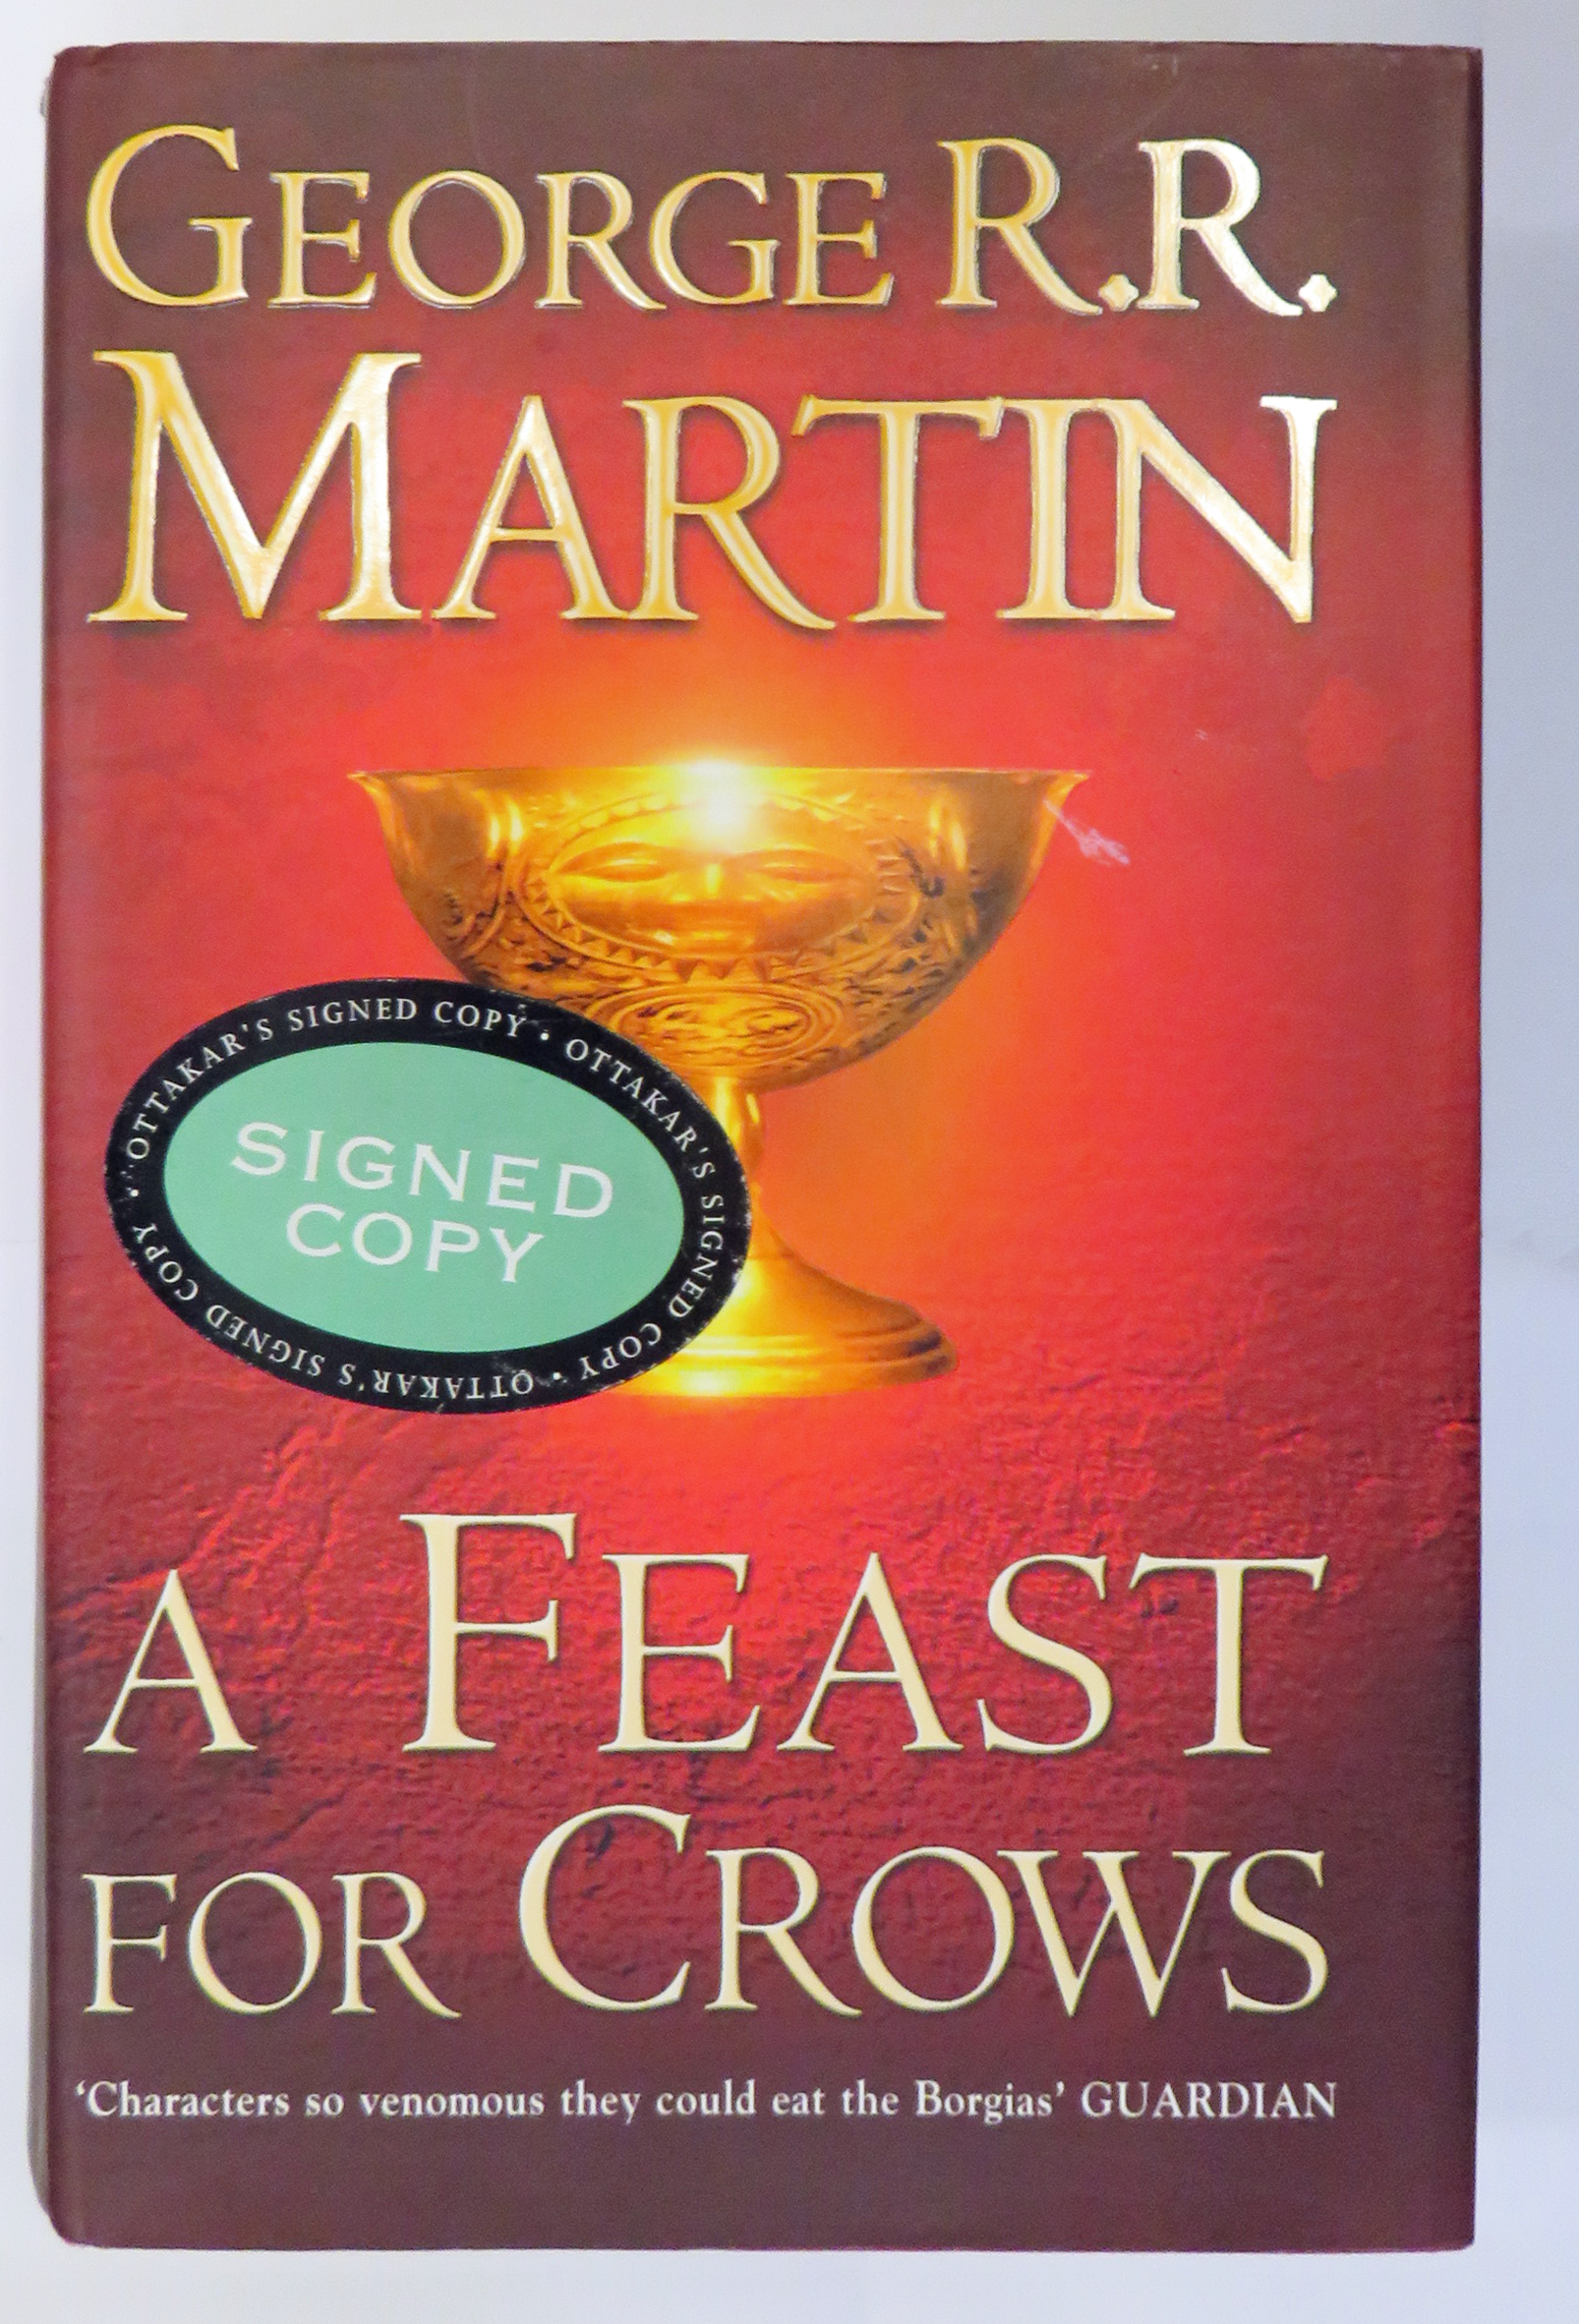 A Feast For Crows Book Four of A Song of Ice and Fire Game of Thrones SIGNED